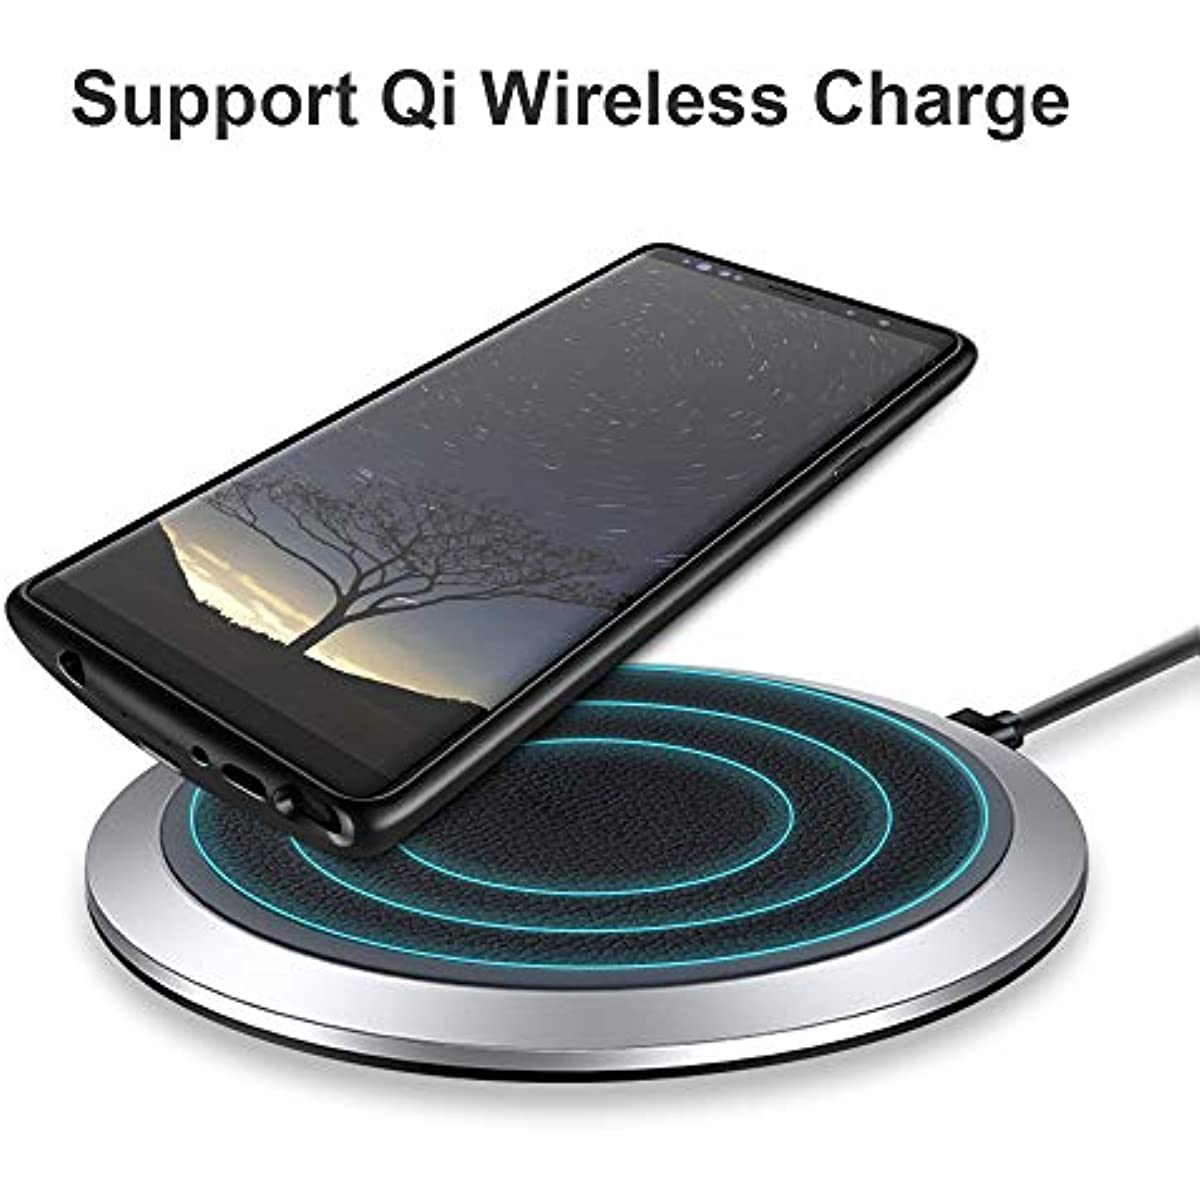 NEWDERY Upgraded Galaxy Note 9 Battery Case Qi Wireless Charging, 5000mAh Rechargeable Extended Charger Case with Raised Bezel and Air Cushion Technology Compatible Samsung Galaxy Note 9 (Black)